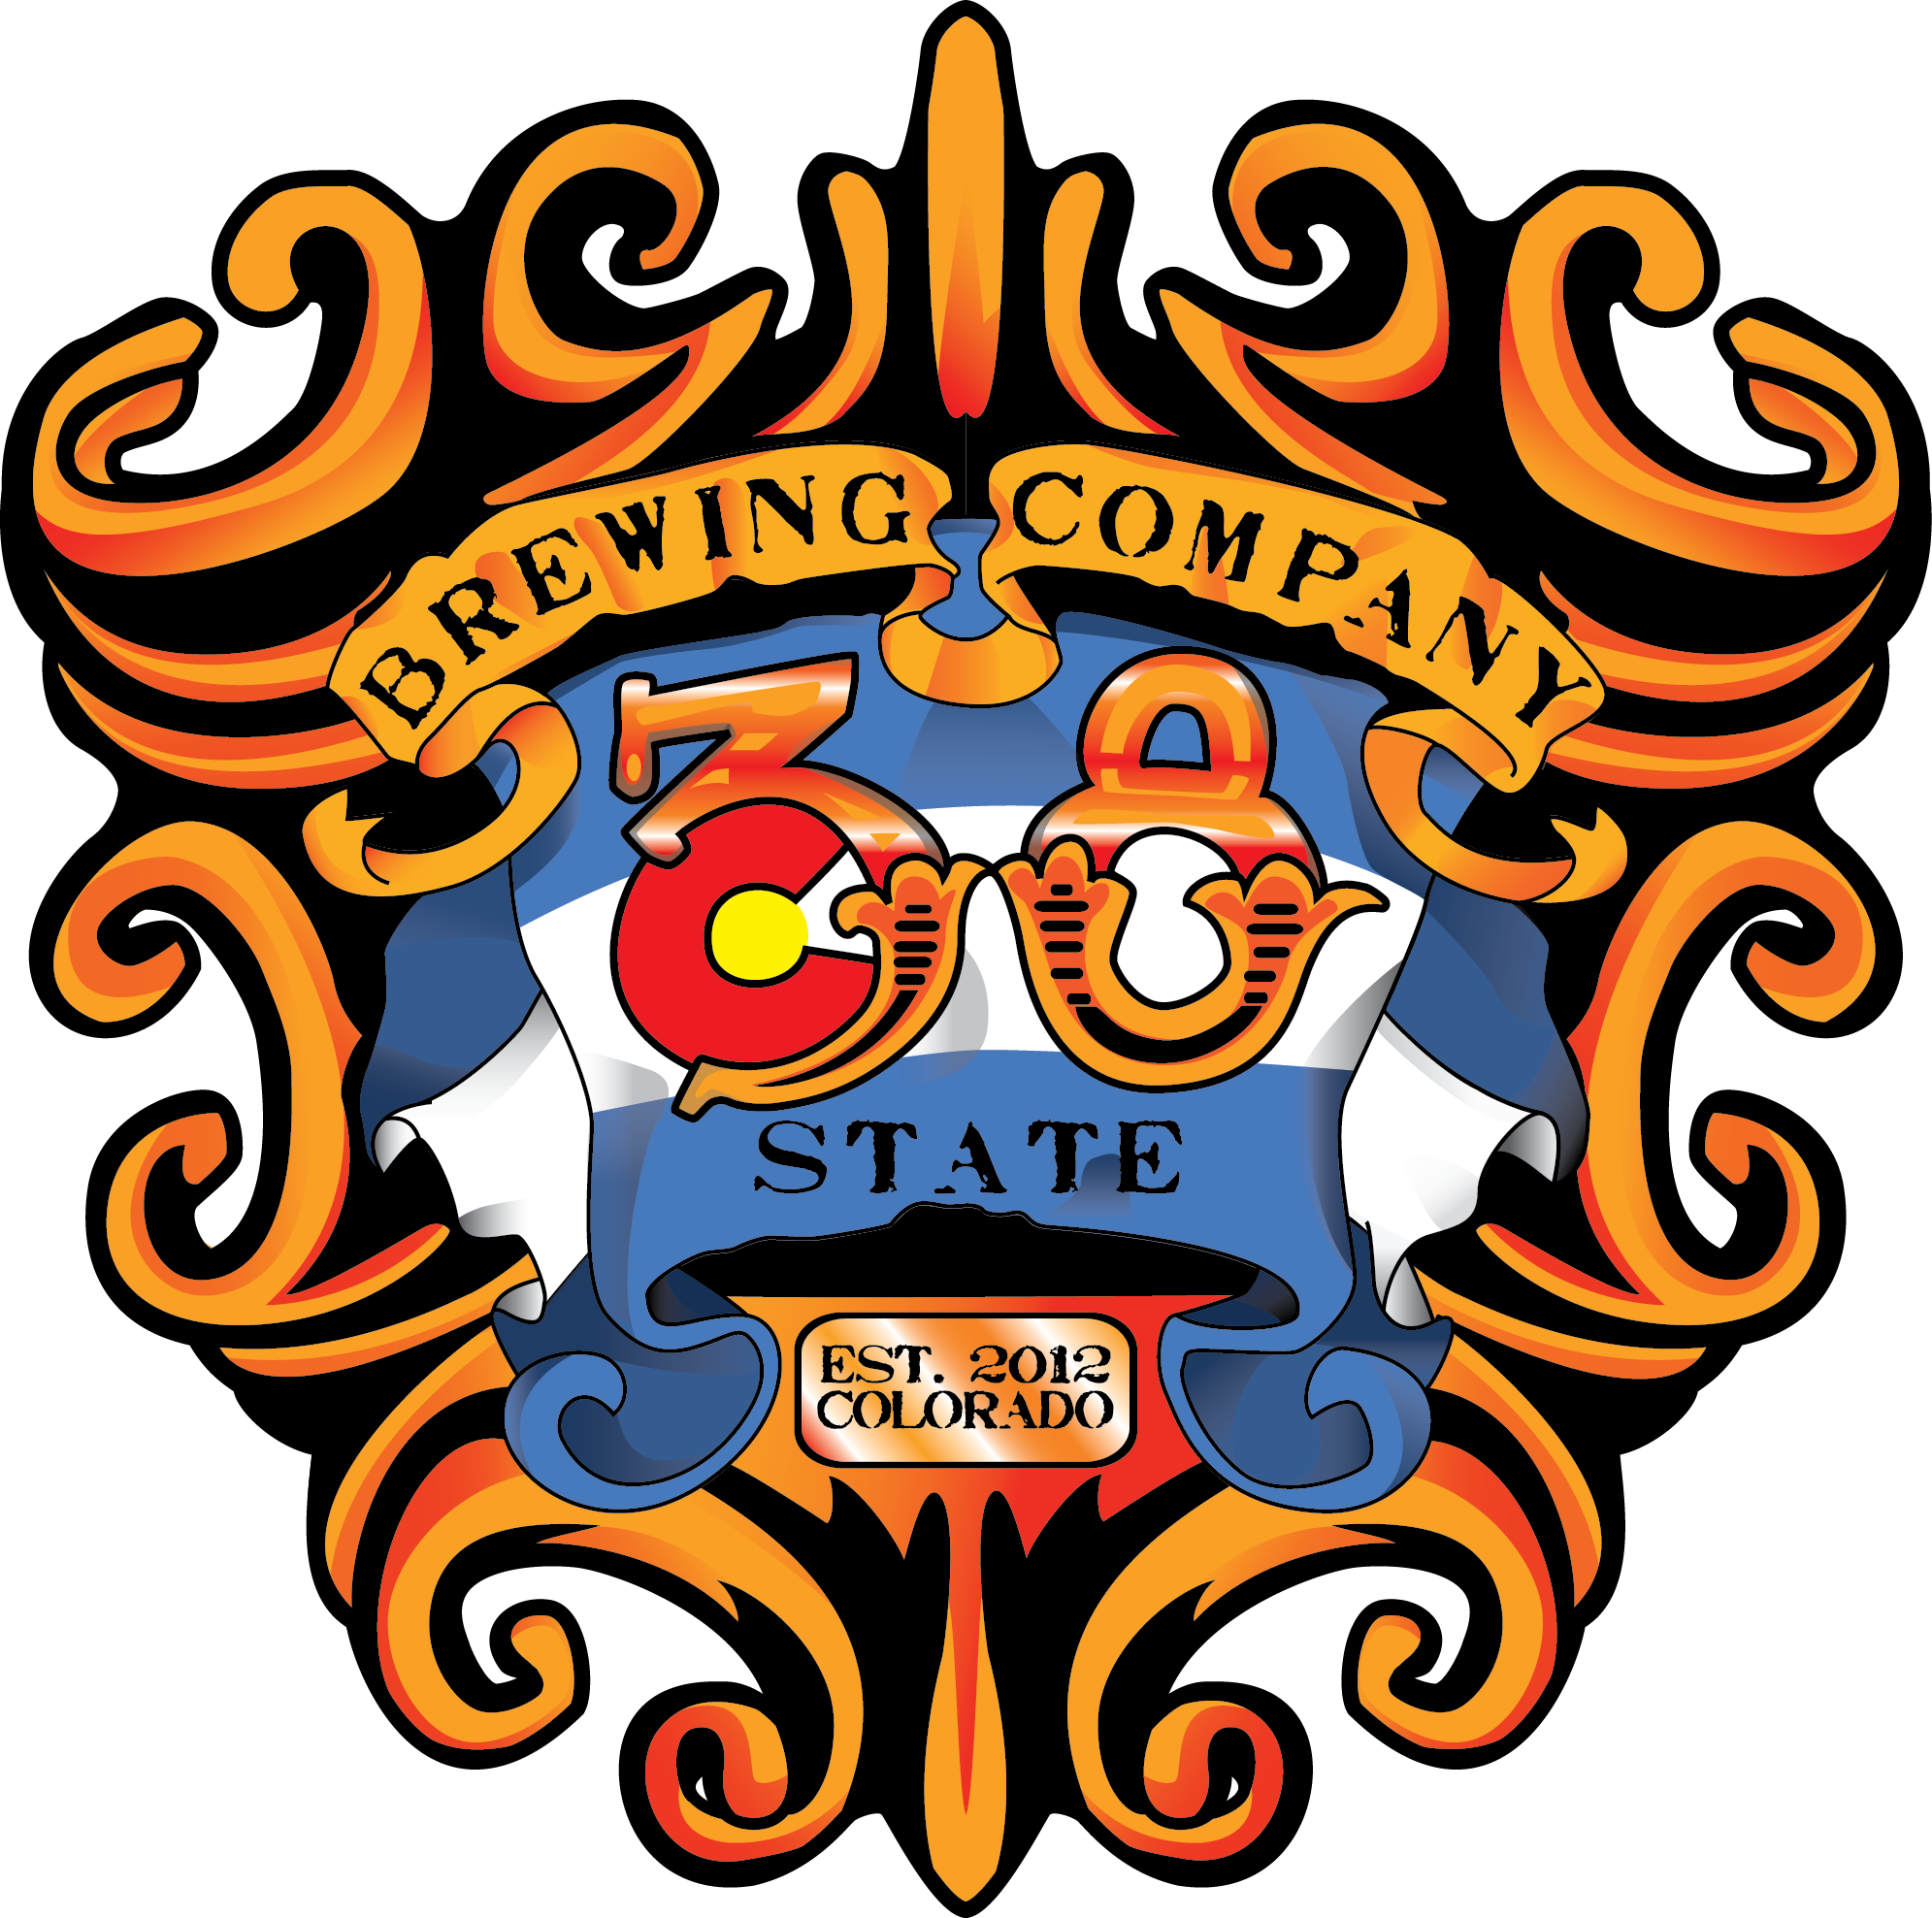 Home - 38 State Brewing Company (1991x1977)